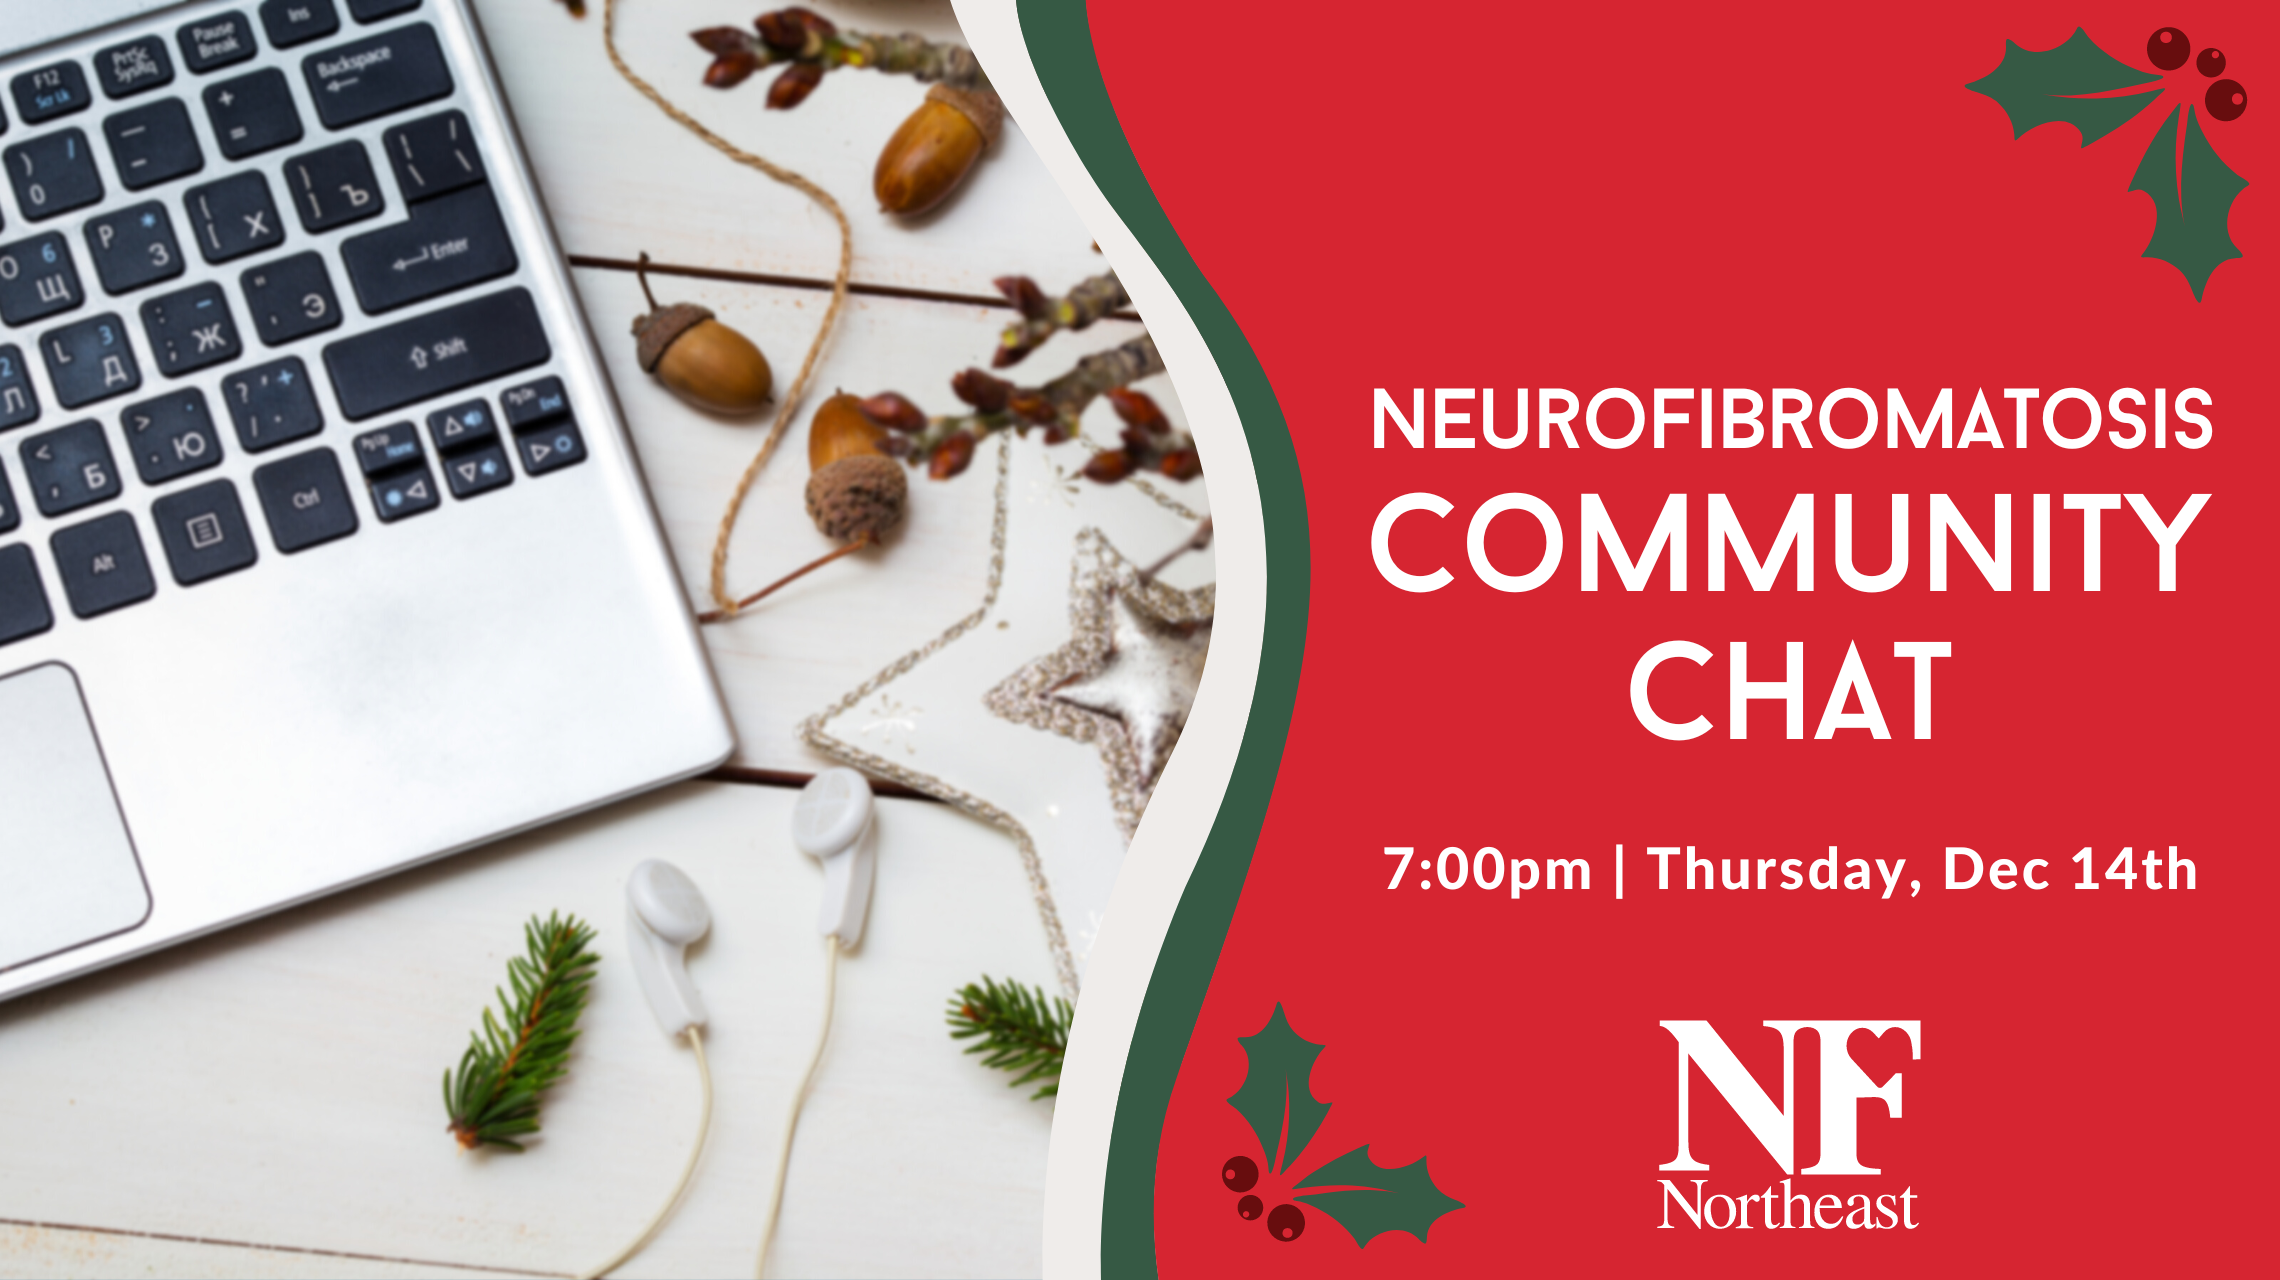 red graphic with image of computer and holly berries for holiday edition of NFNE community chat